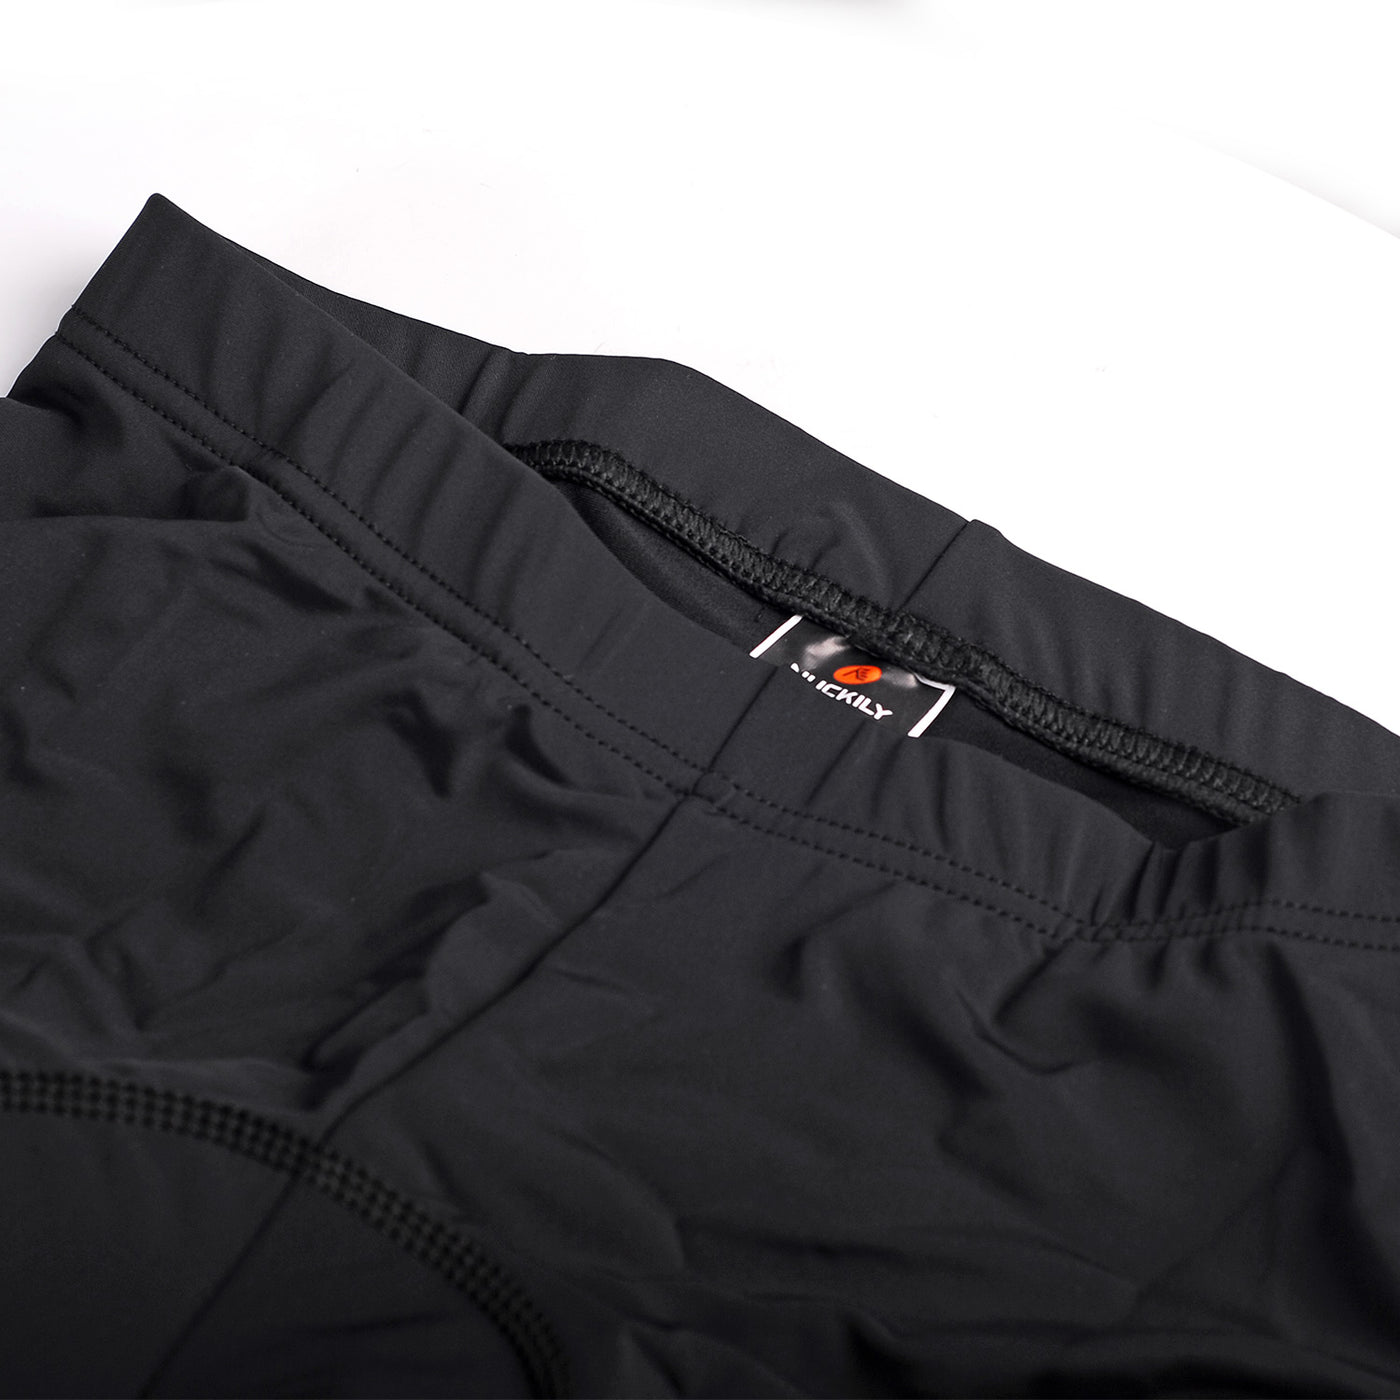 Nuckily MB002 Gel Padded Cycling Short - Cyclop.in